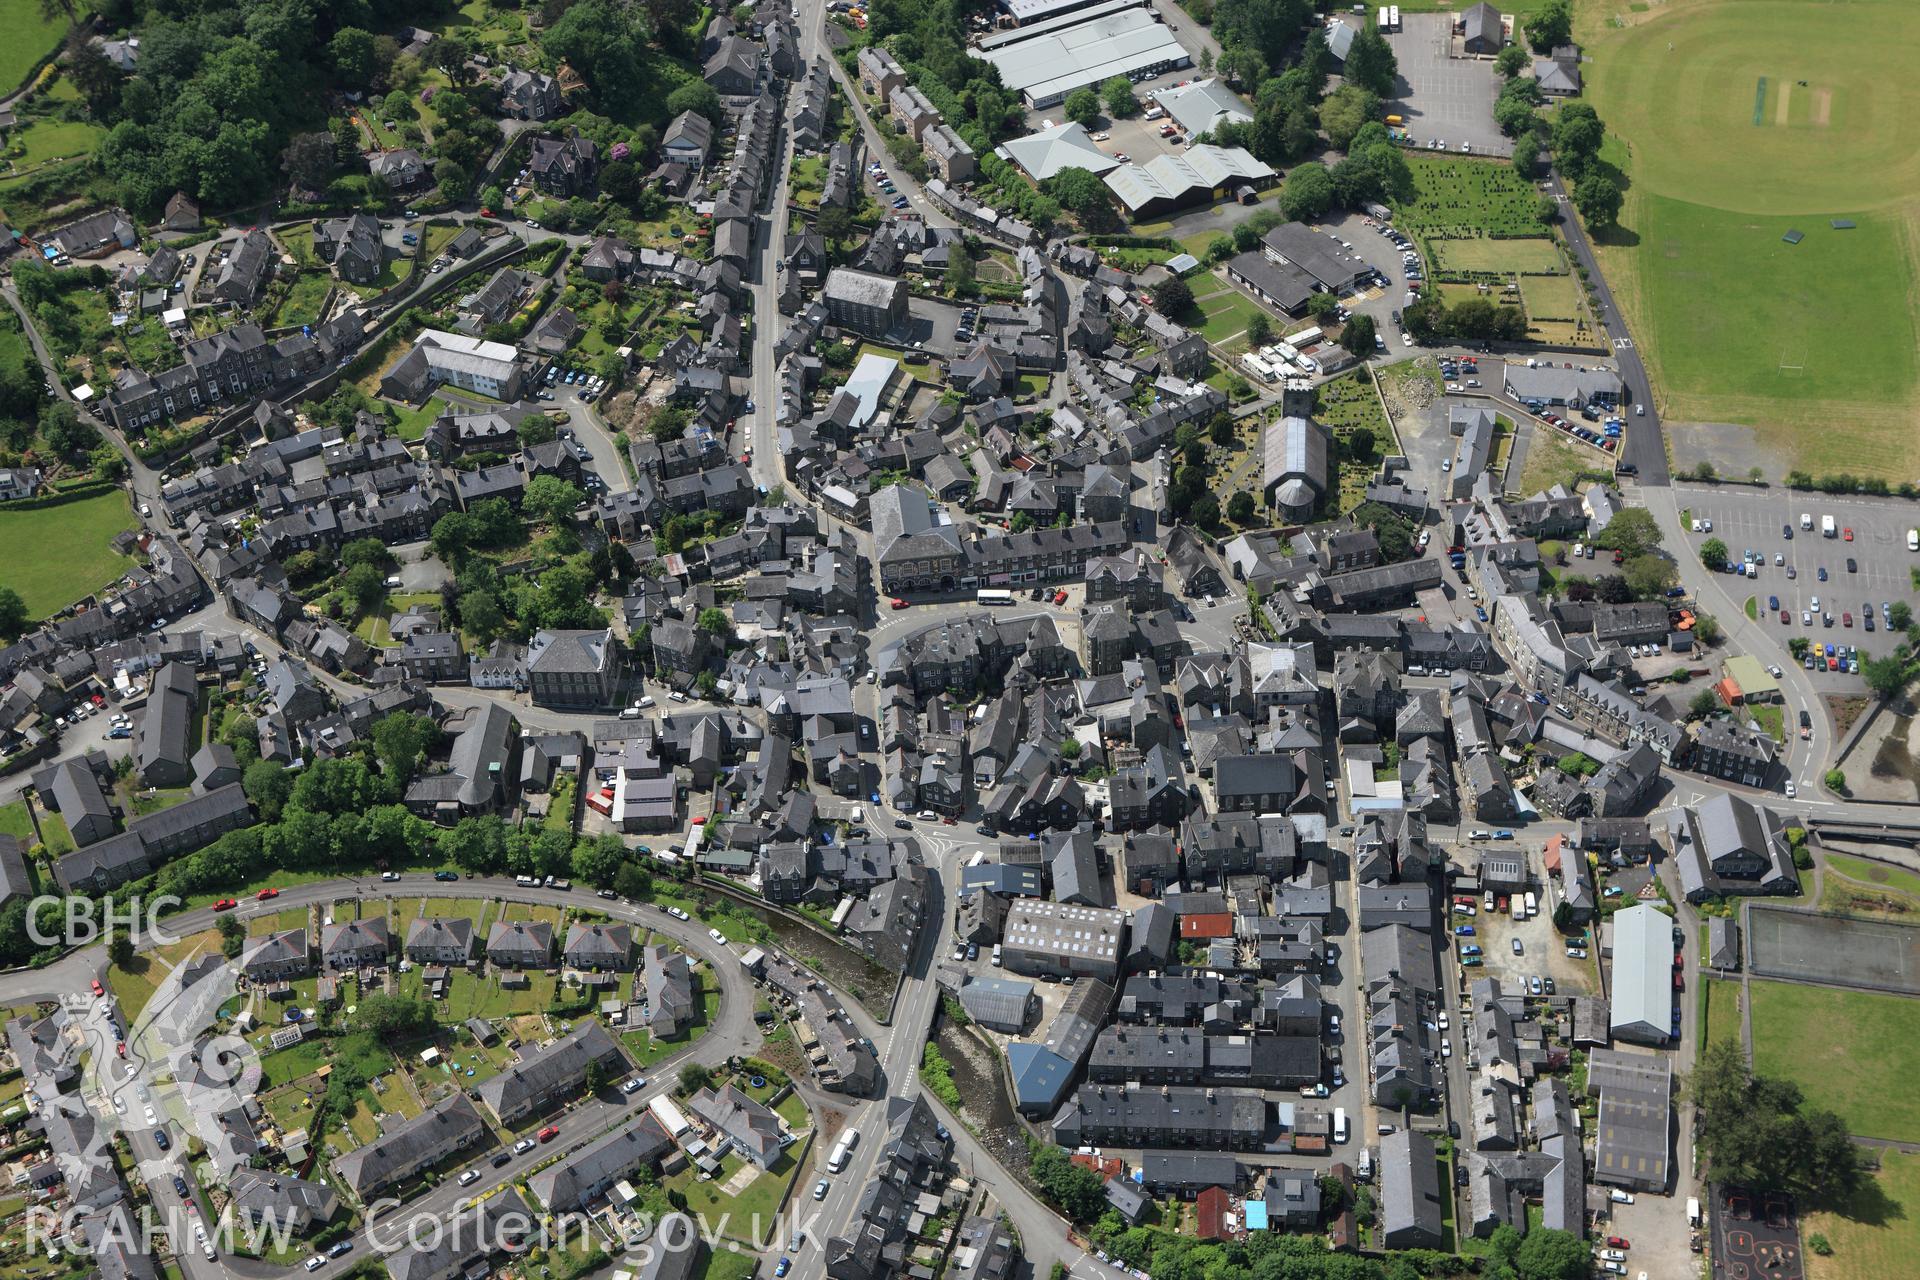 RCAHMW colour oblique aerial photograph of Dolgellau. Taken on 02 June 2009 by Toby Driver